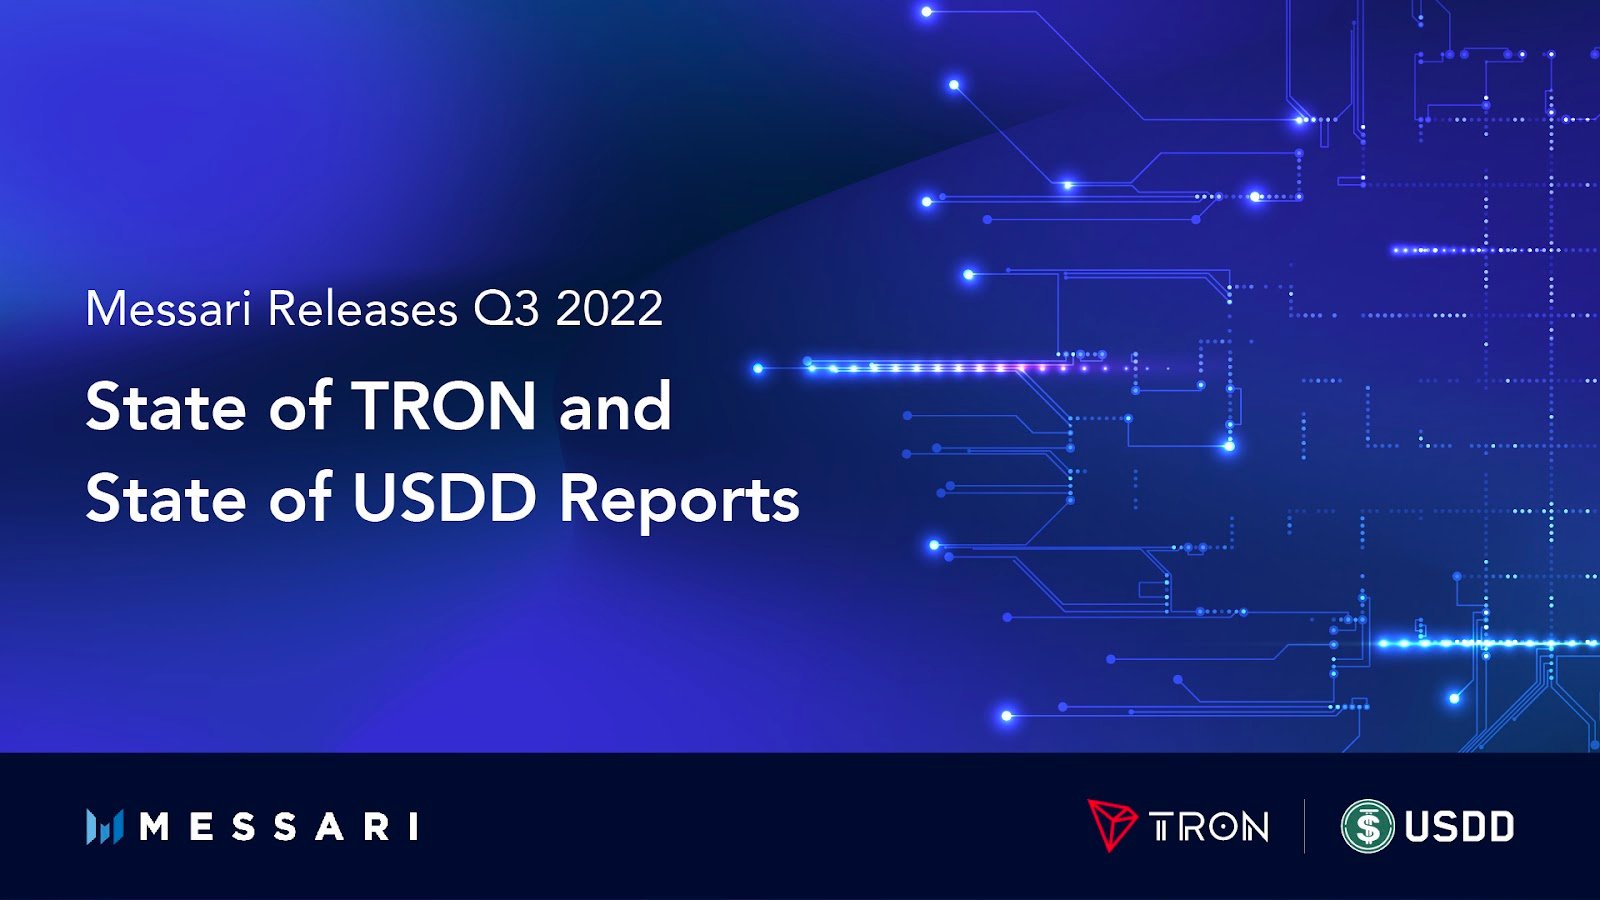 Messari Releases Q3 2022 State of TRON and State of USDD Reports